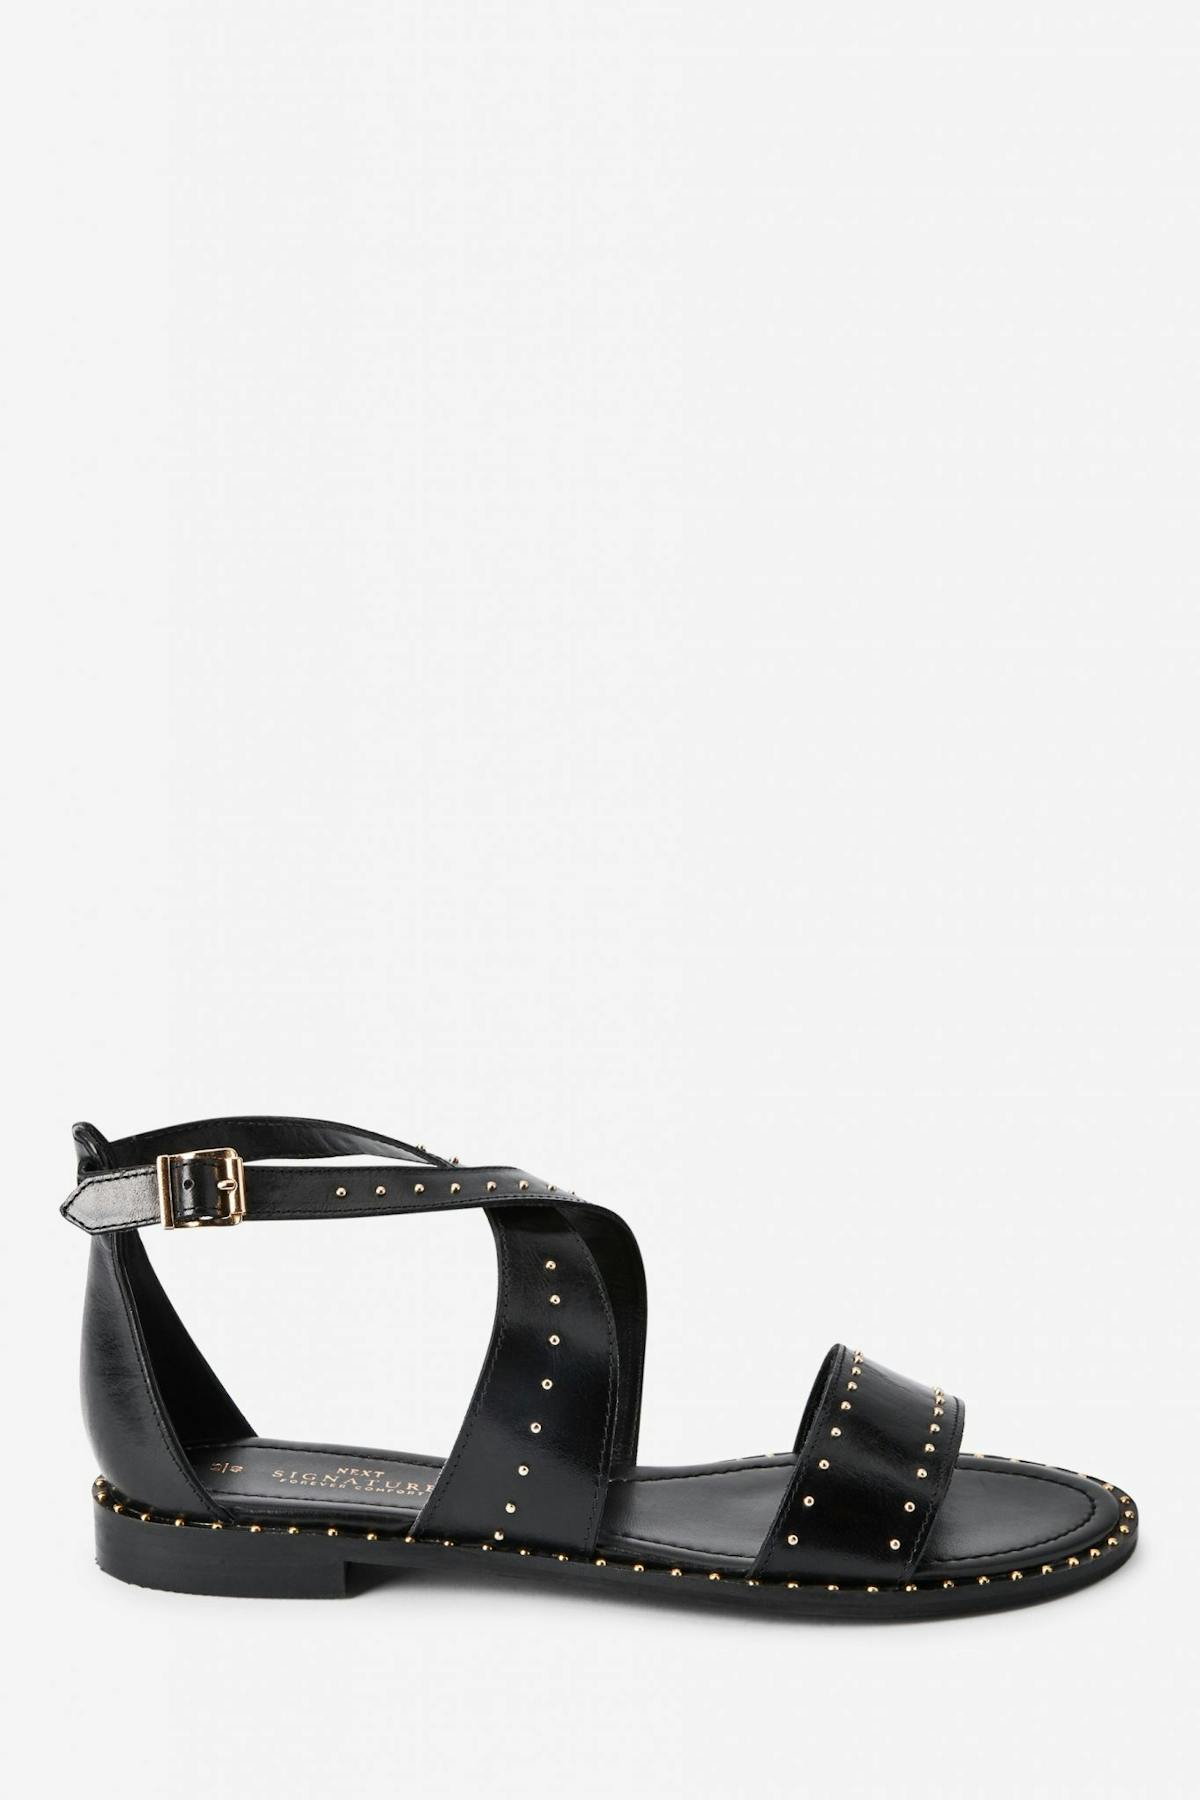 9 studded sandals you’ll want to wear with every outfit